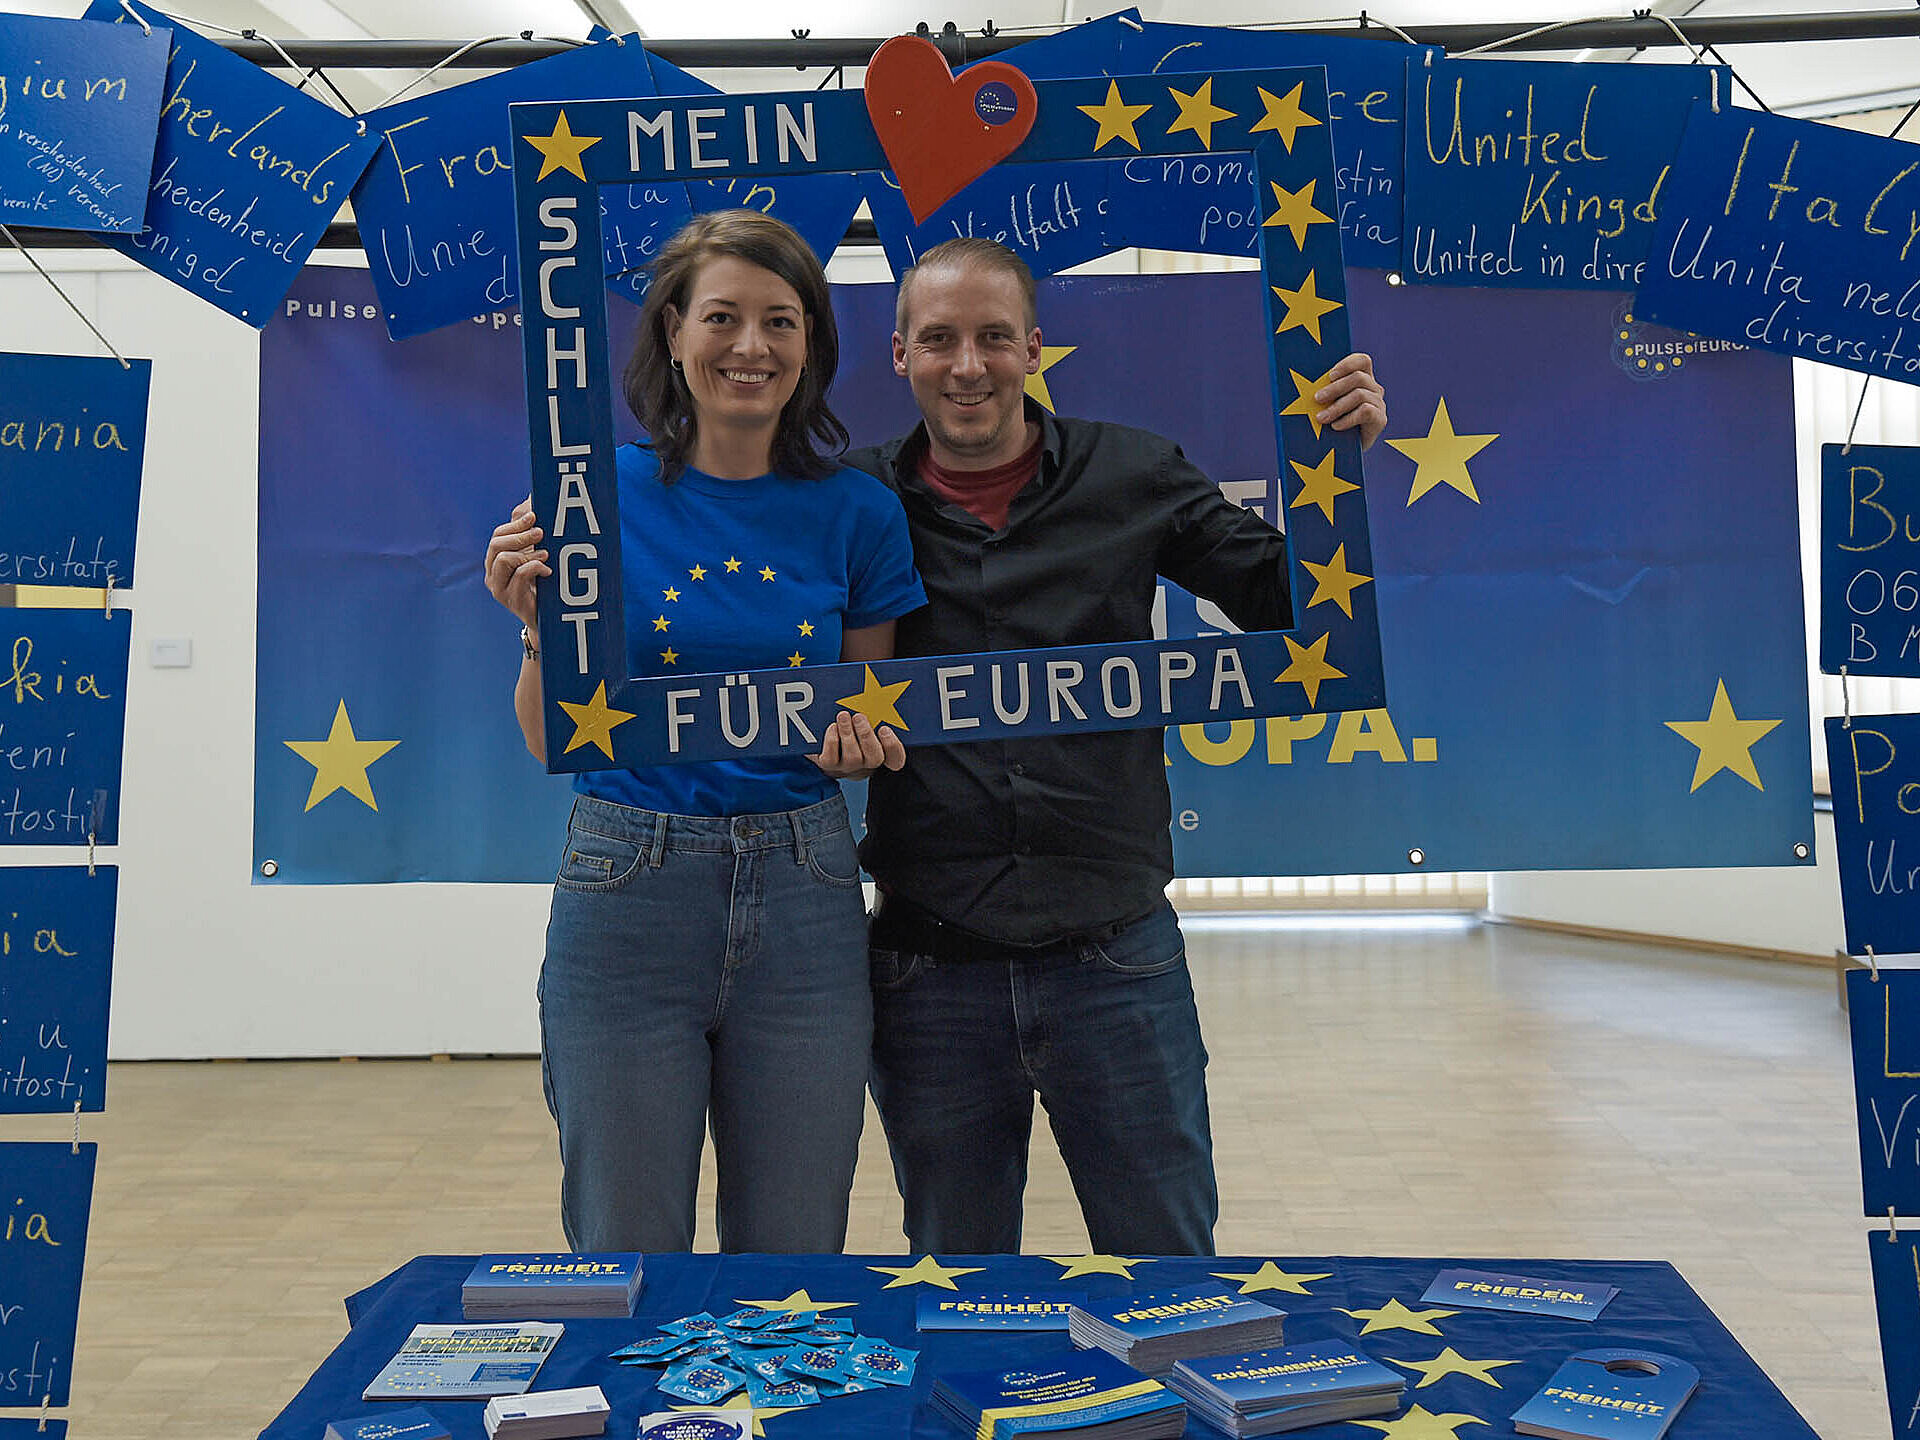 Photo campaign in Gelsenkirchen in the run-up to the European elections 2019, Photo: RVR / Petra Hartmann